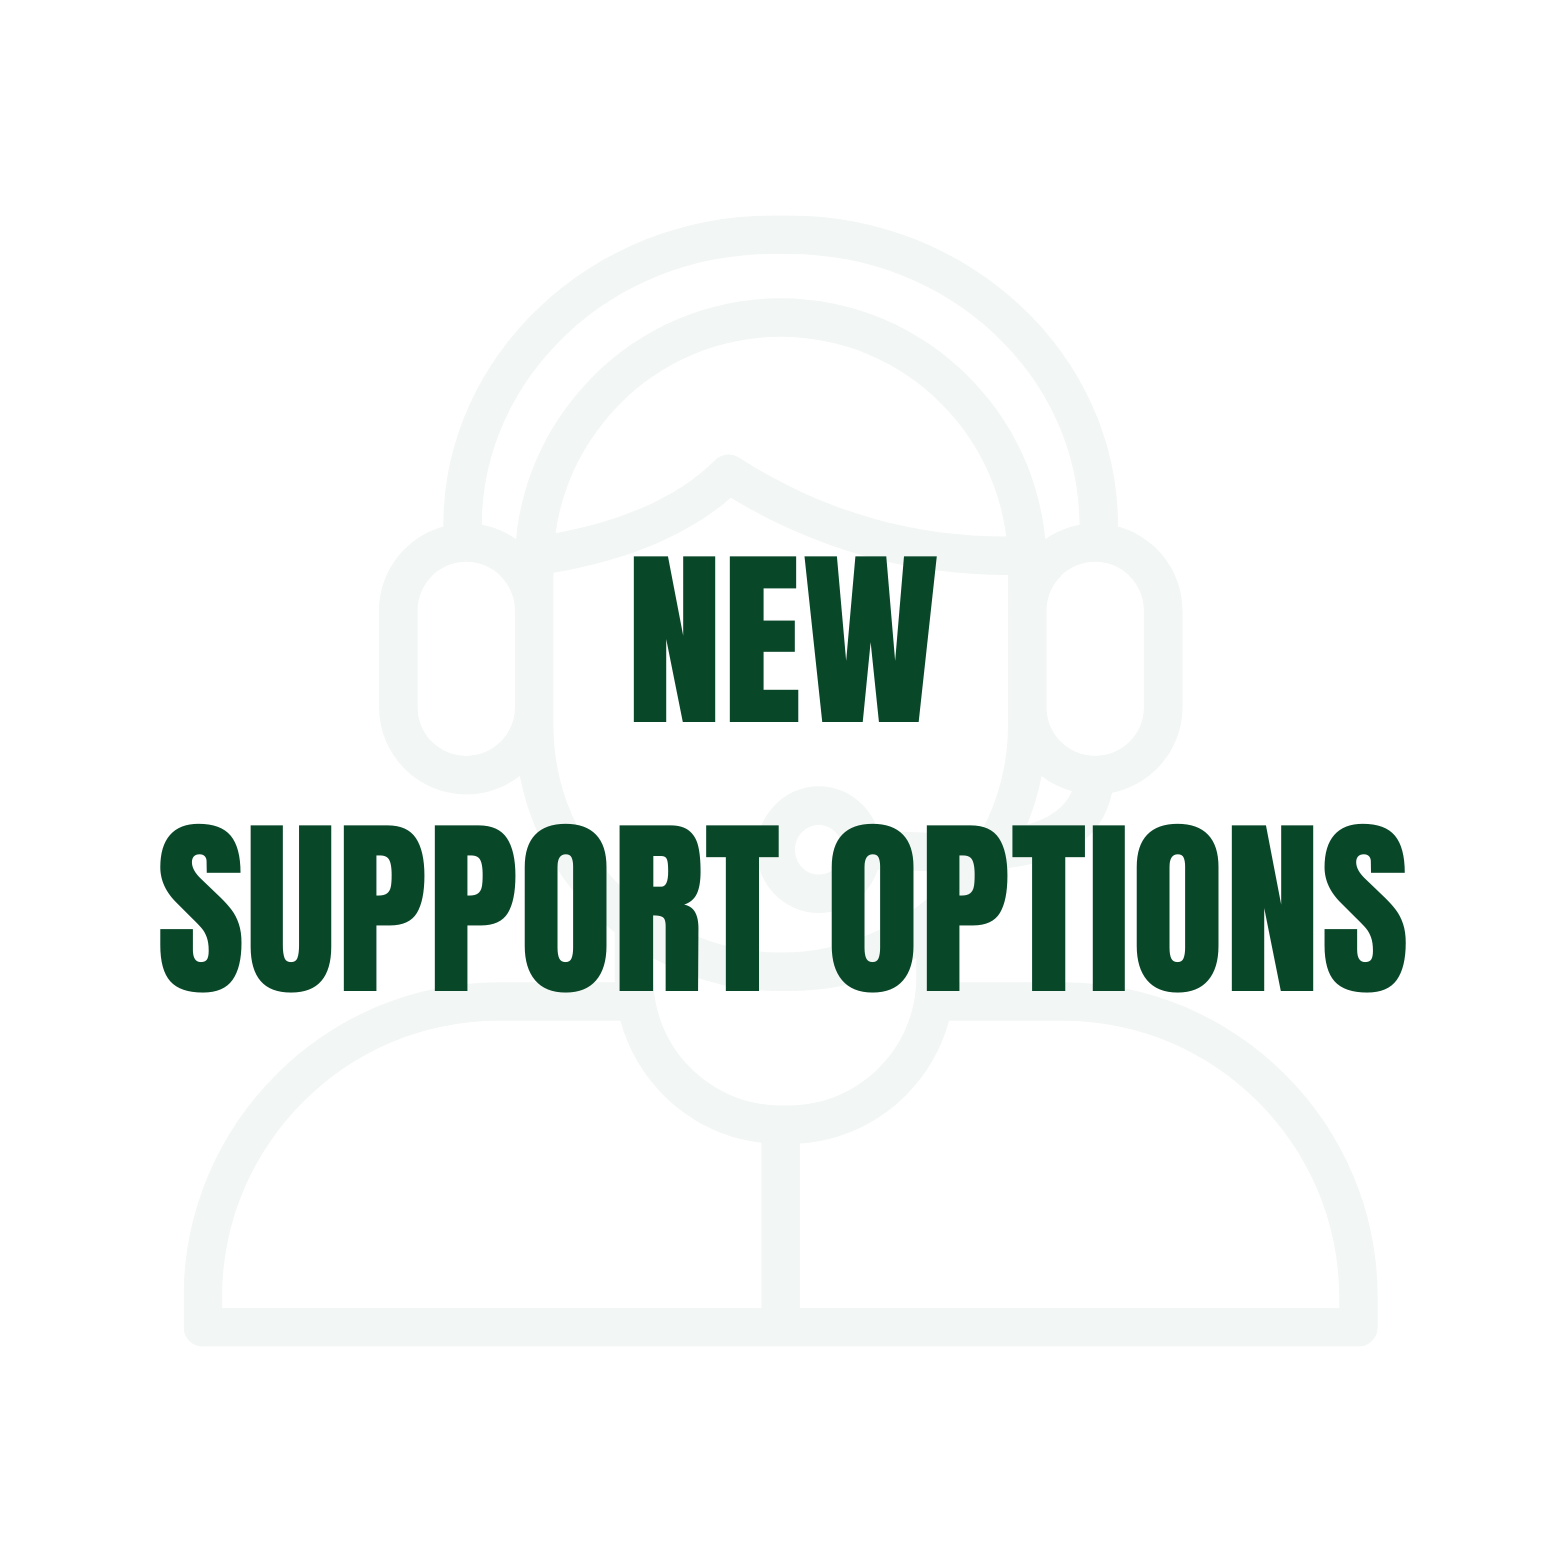 Our NEW support system is now live!